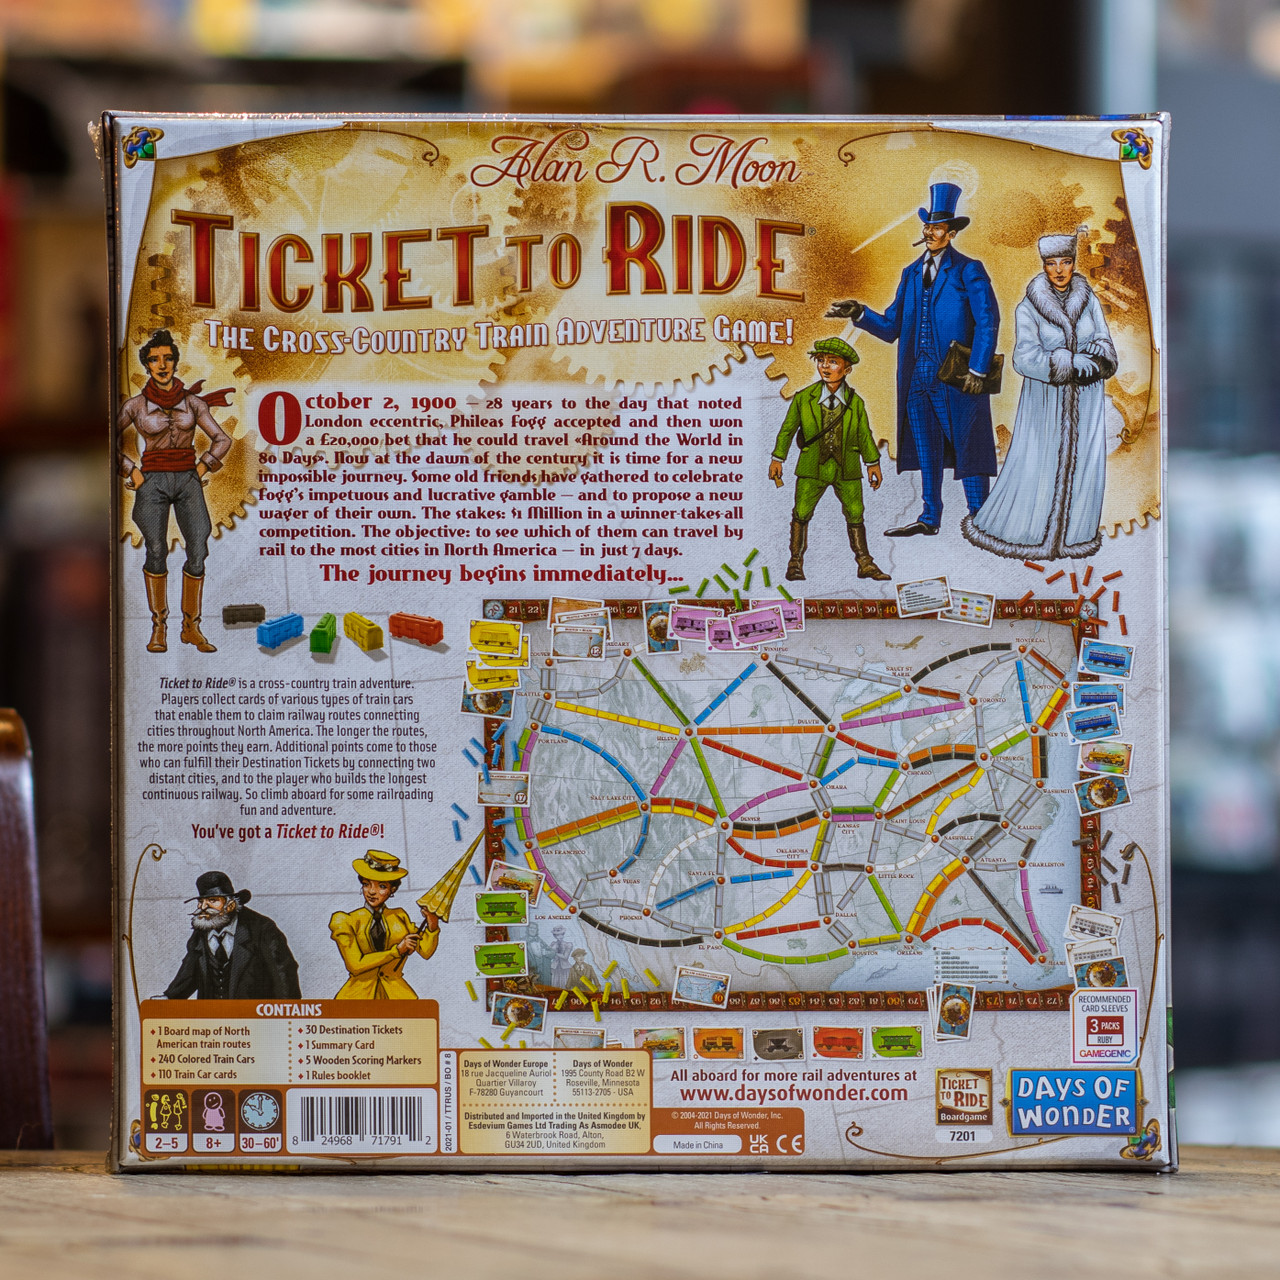 Ticket To Ride: The Cross-Country Train Adventure Game! - George & Co.